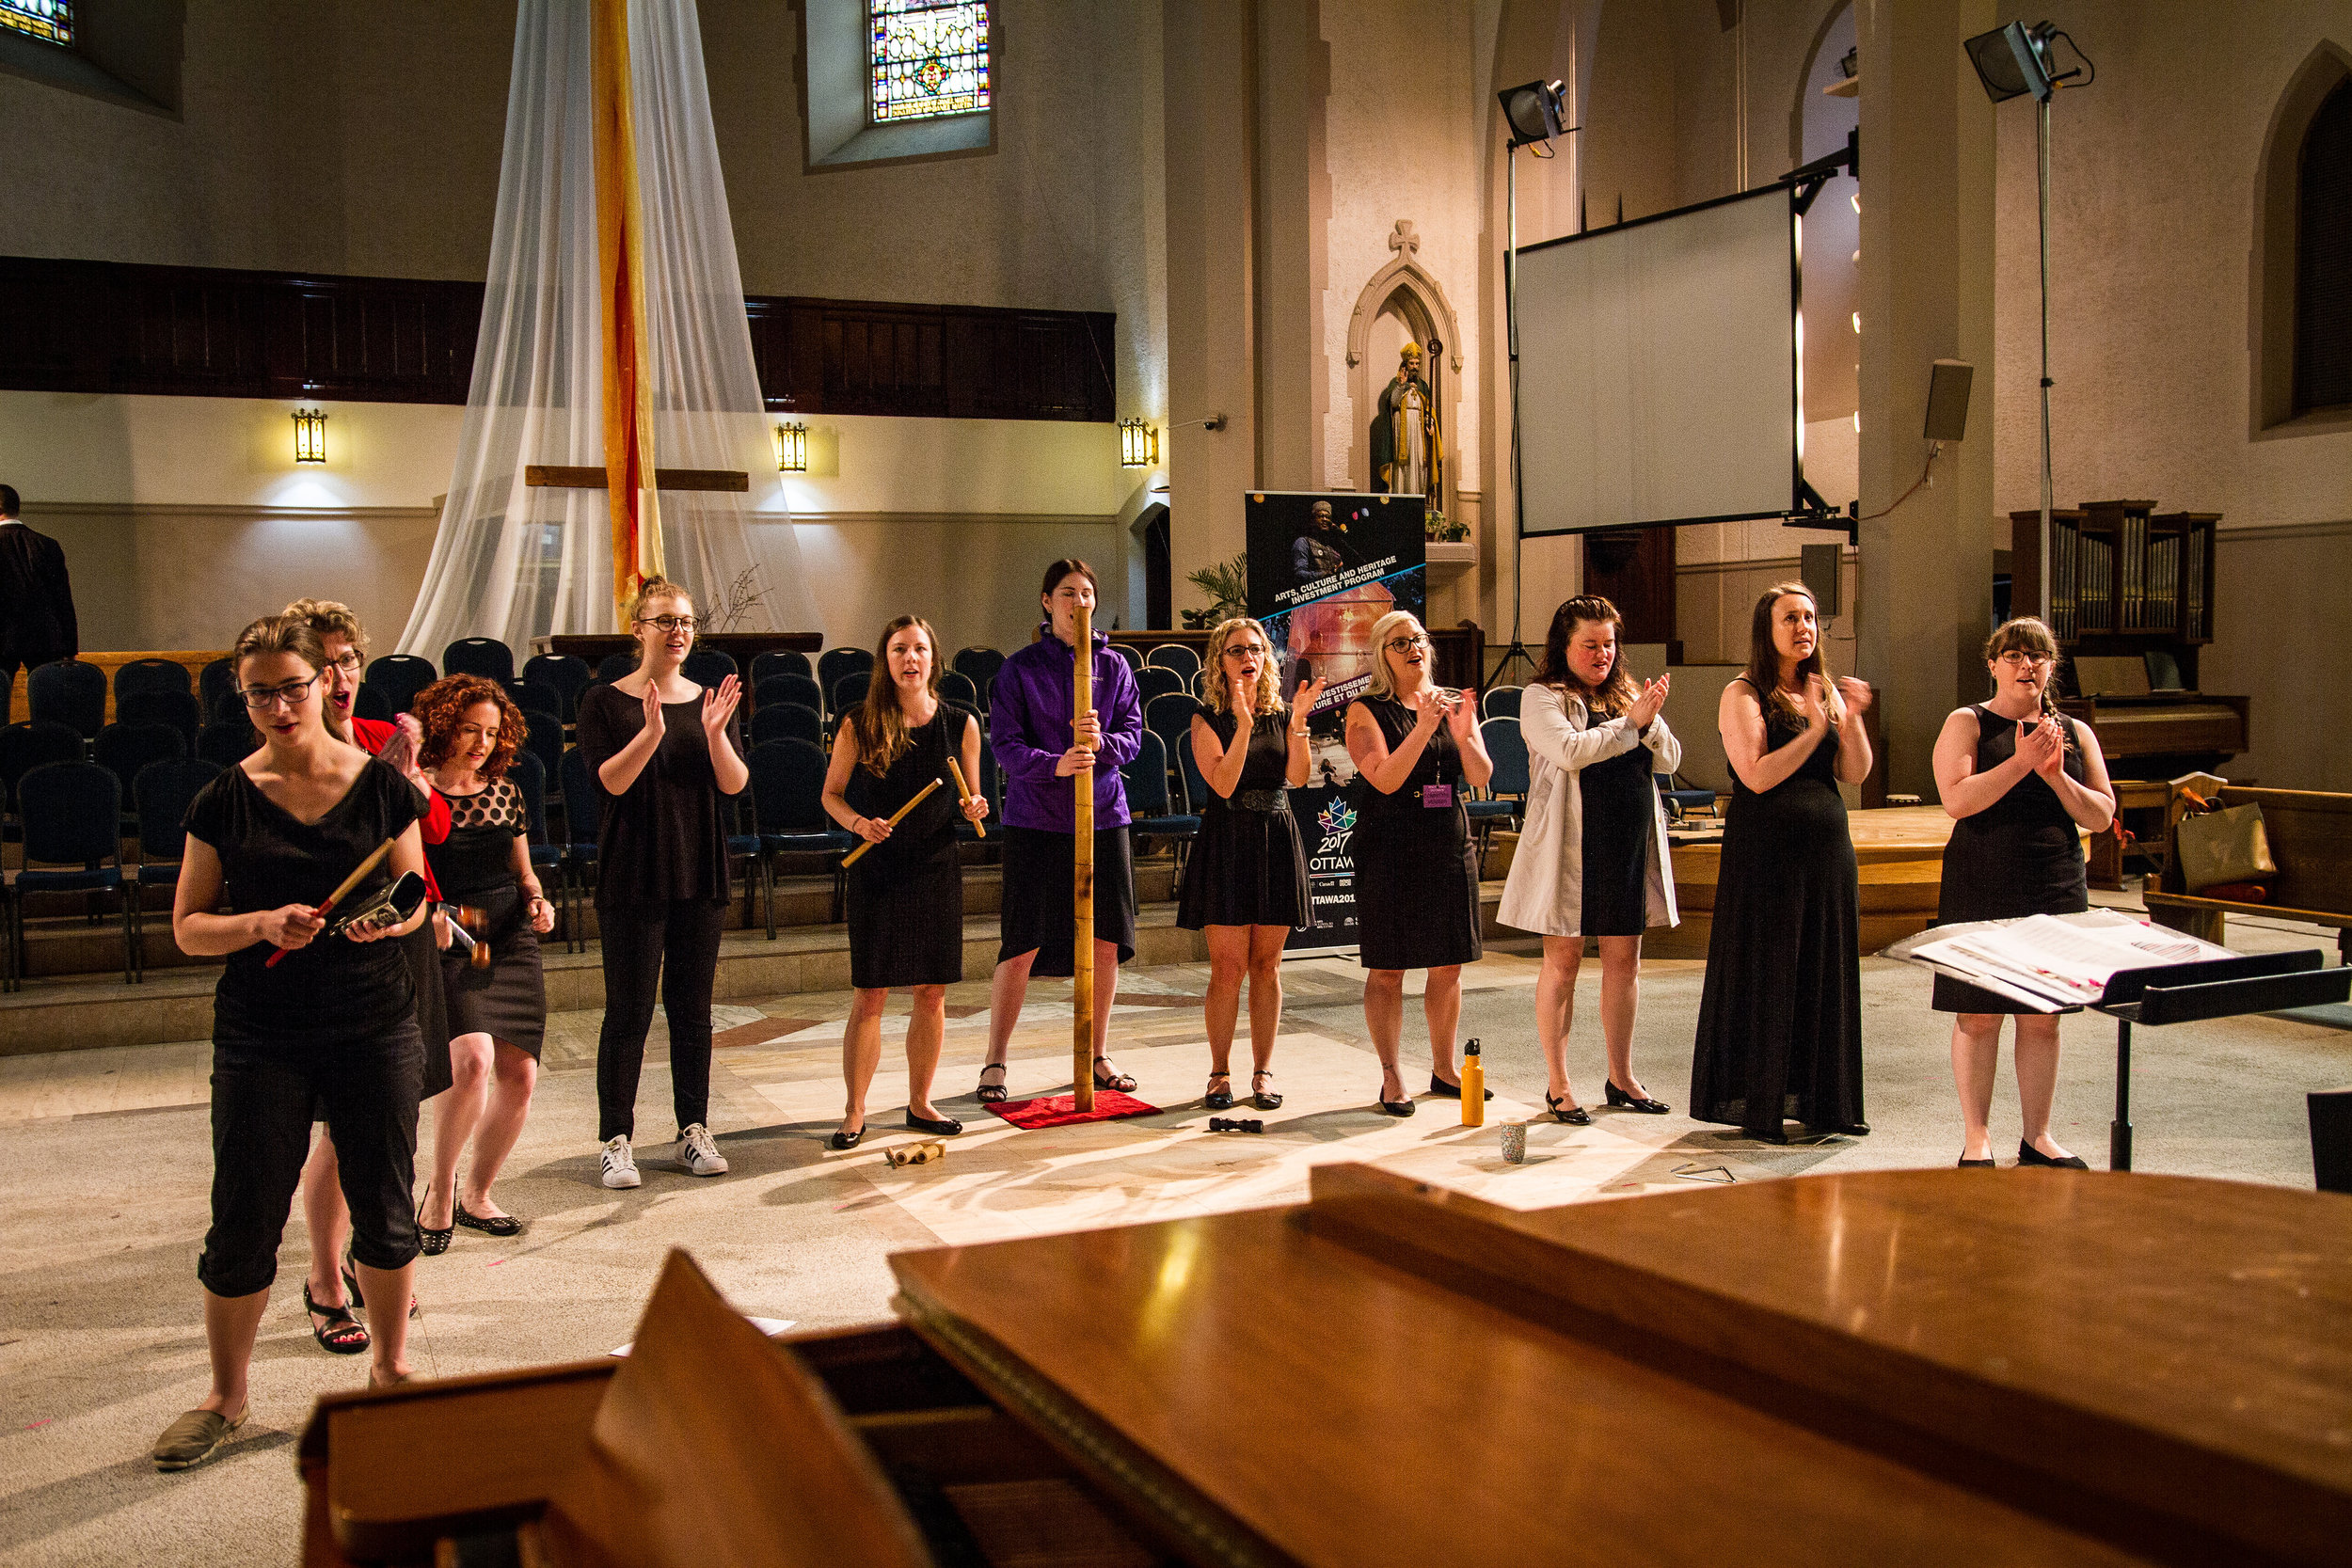  Rehearsing Stephen Hatfield's "Überlebensgross" before the final  Sing Ottawa en choeur &nbsp;festival concert.  Photo Credit:  Anthony Boxell Photography   